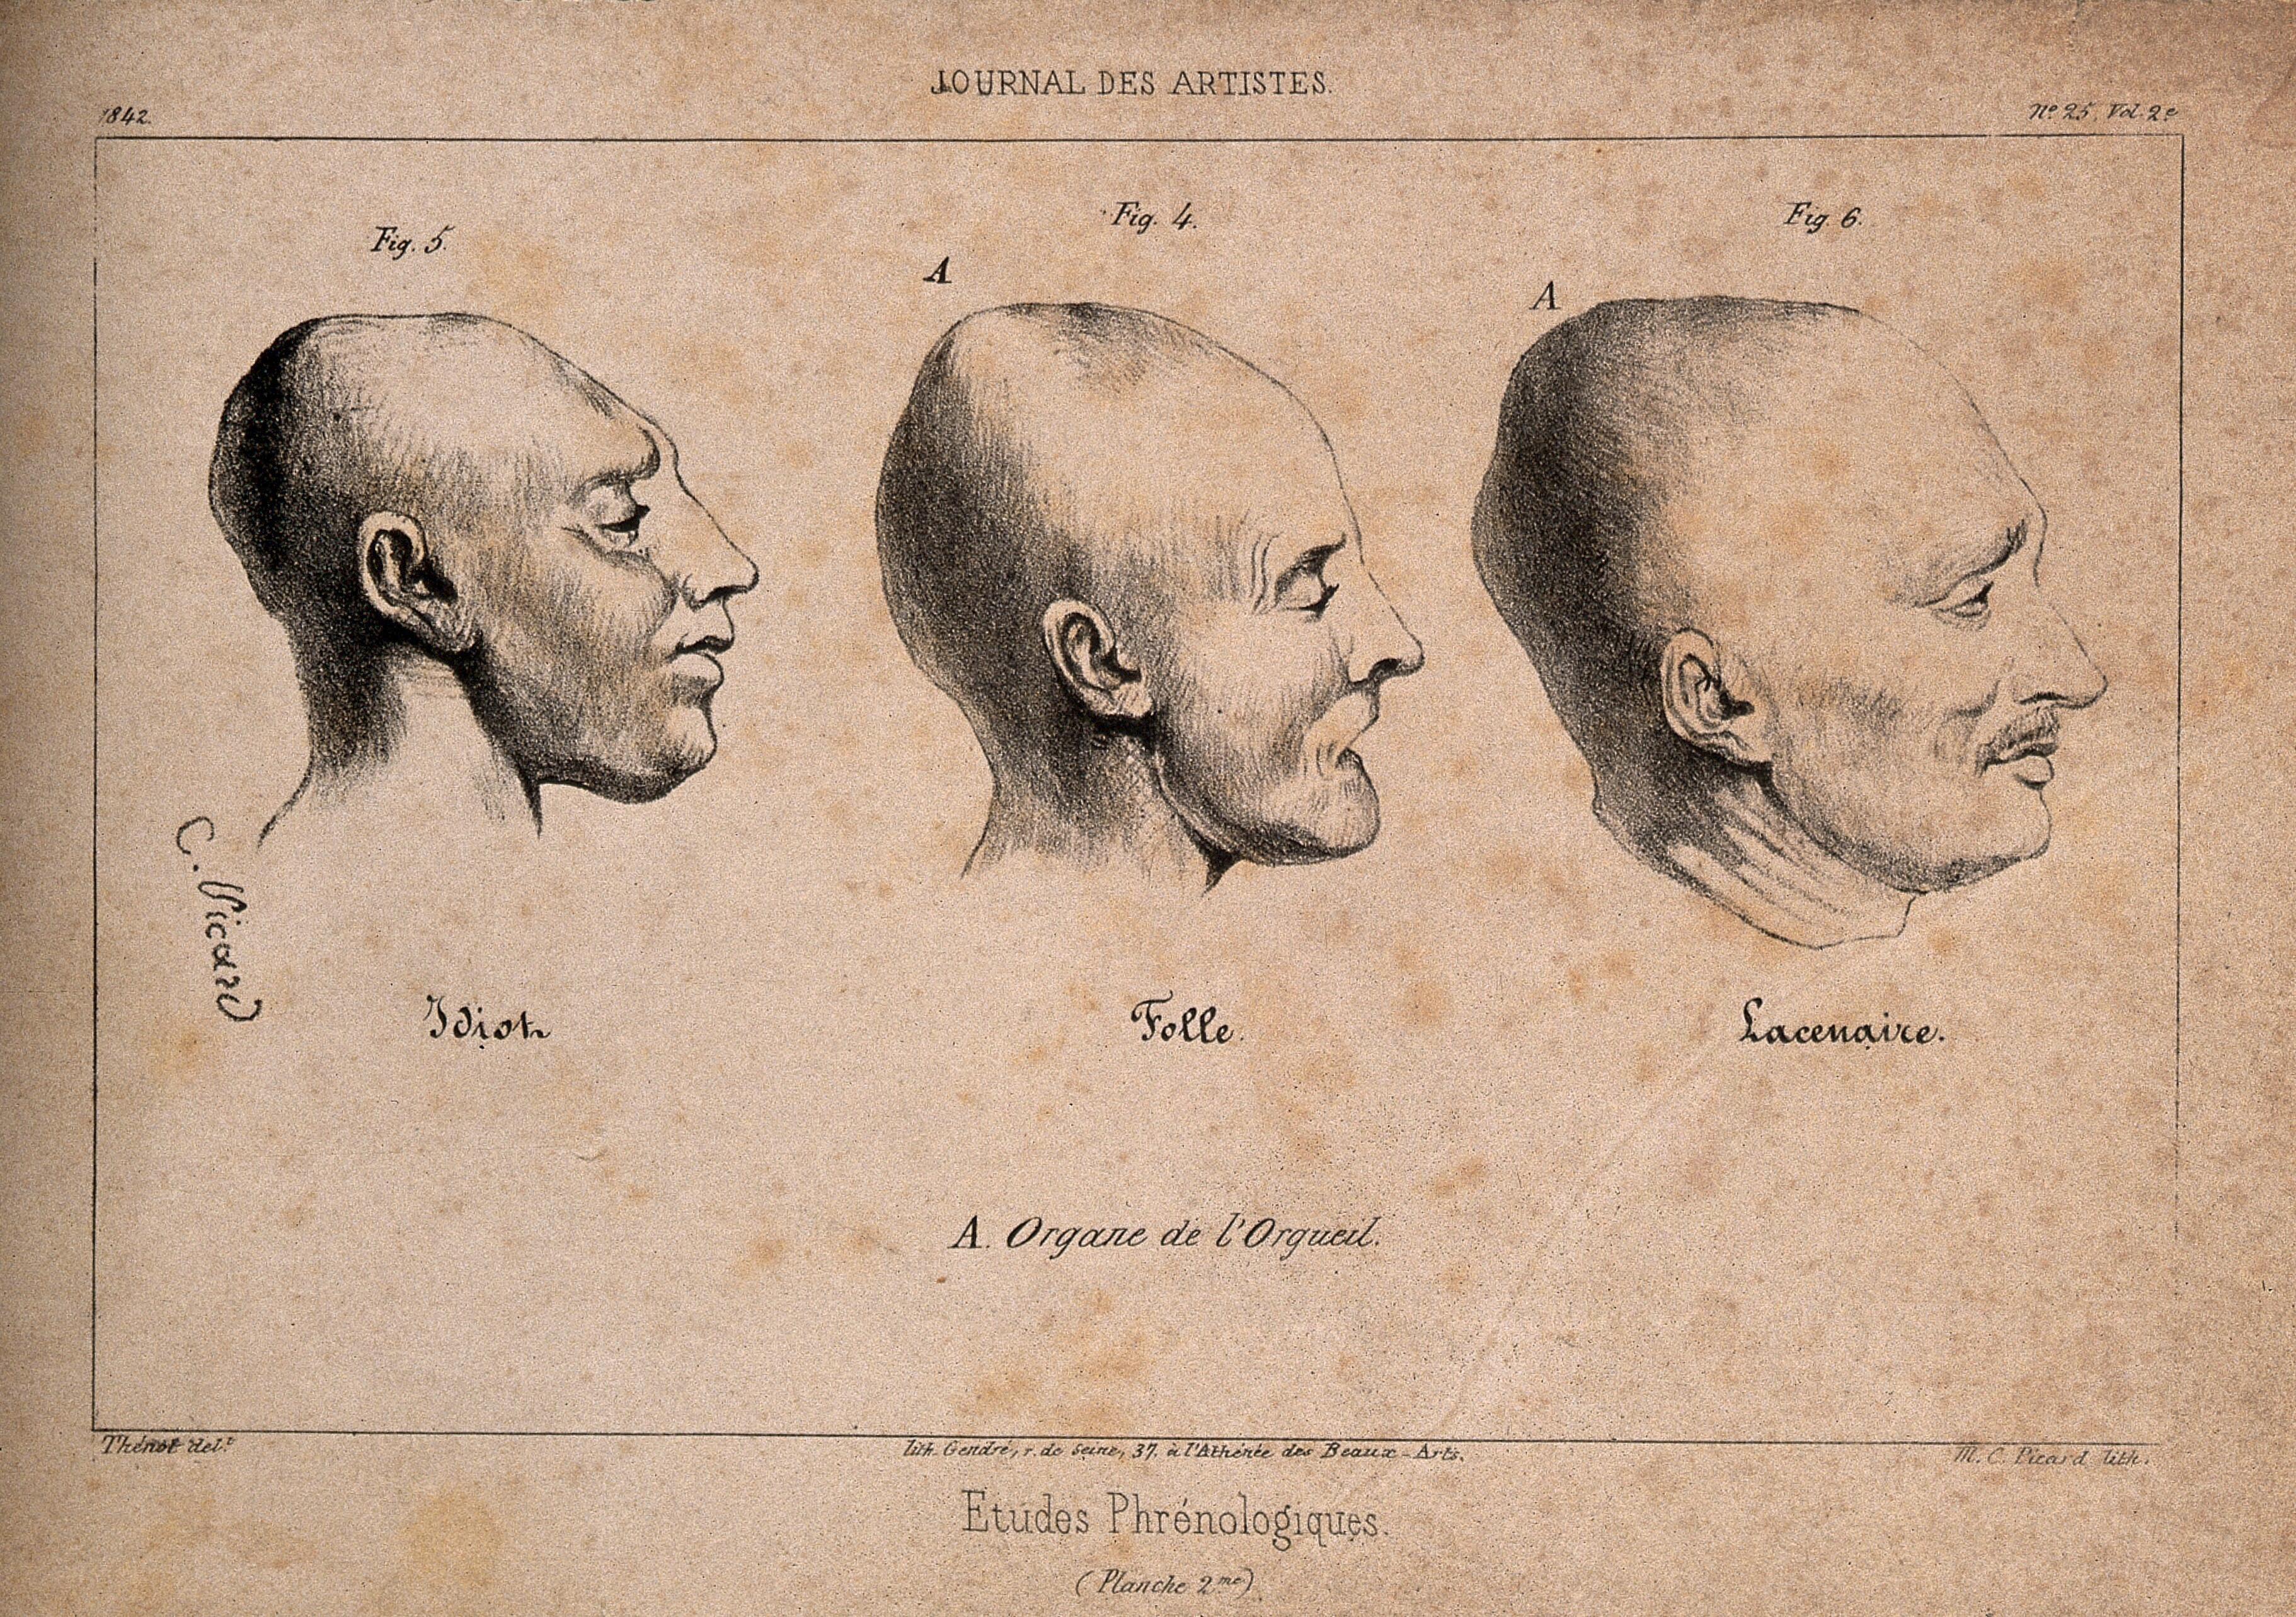 Three heads showing phrenological traits associated with insanity: a mentally defective person, a mad woman, and the murderer P.F. Lacenaire. Lithograph by C. Picard, 1842, after J.P. Thenot.